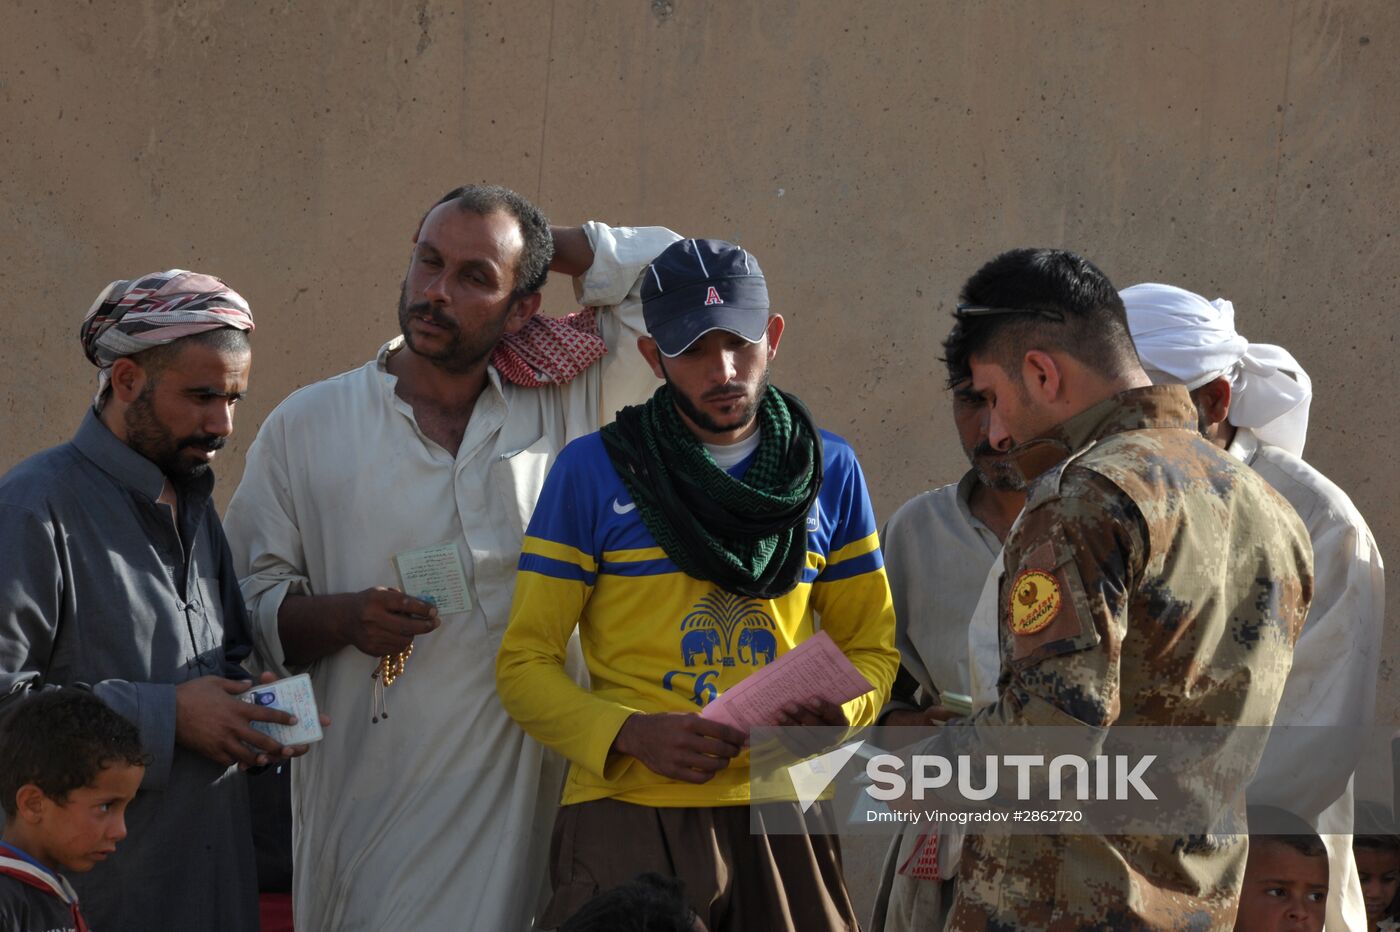 Refugees from ISIS-occupied lands come to Kirkuk in Iraq